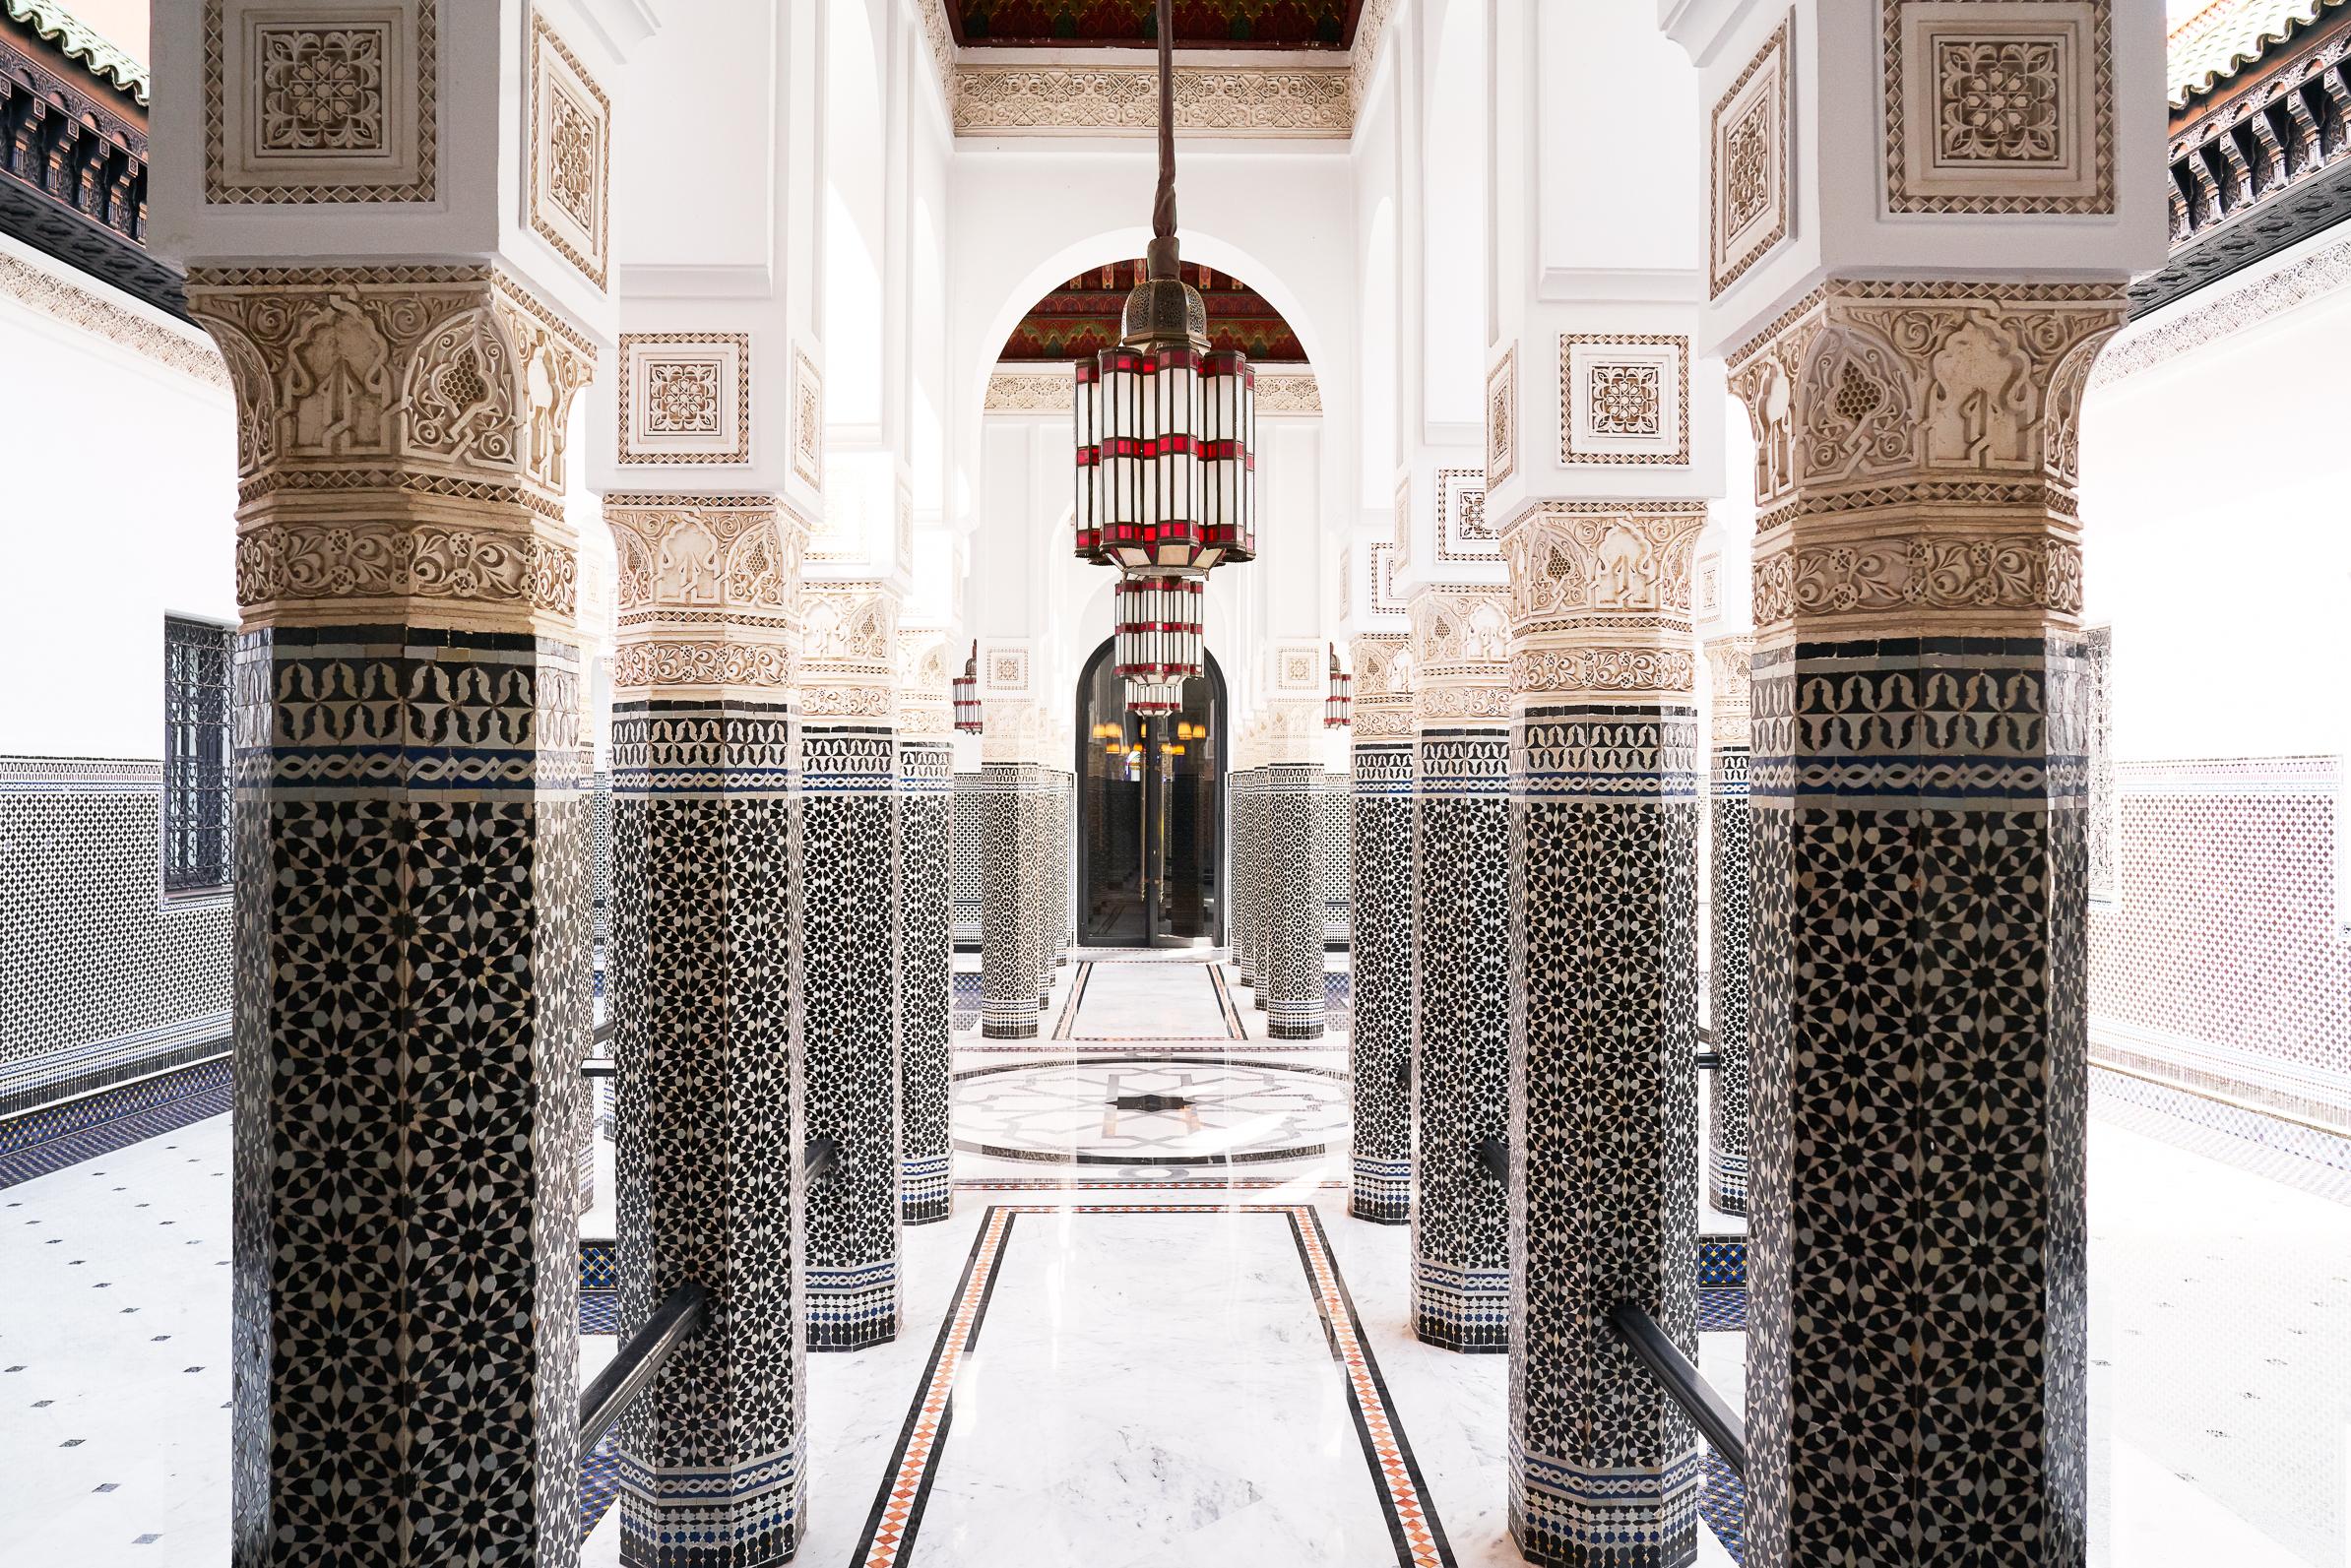 Troy House - La Mamounia #1, Photography 2019, Printed After